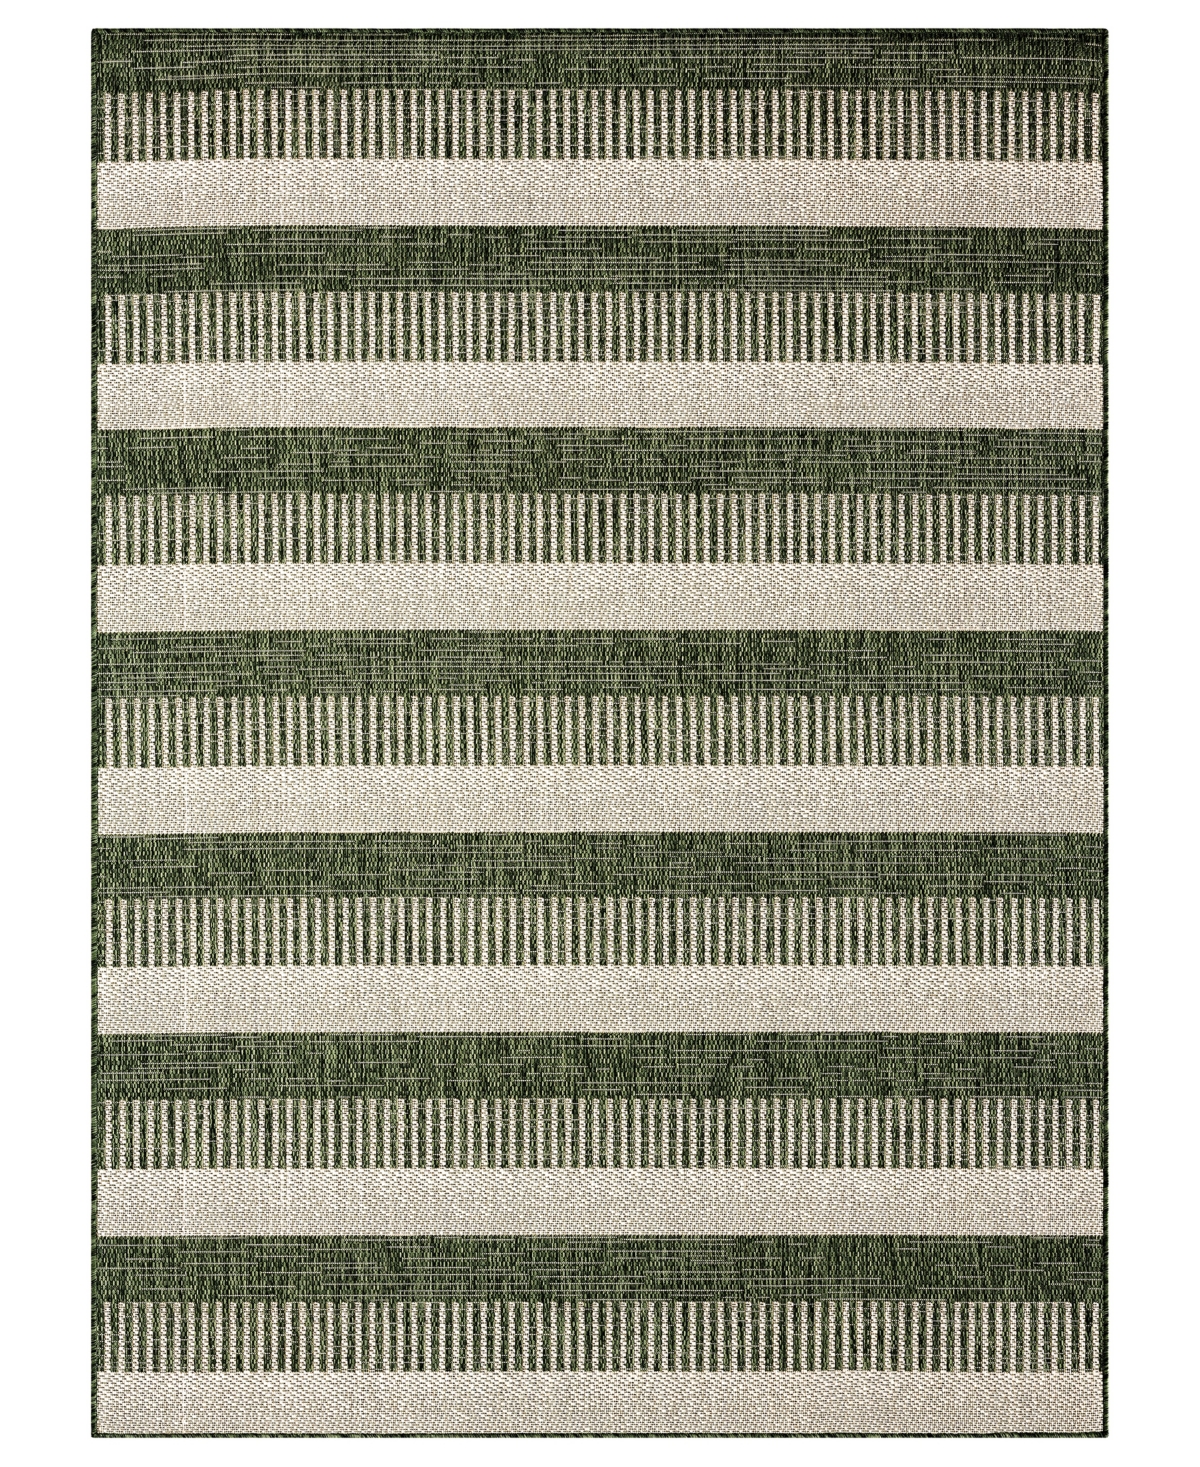 Nicole Miller Patio Country Charlotte 5'2" X 7'2" Outdoor Area Rug In Olive